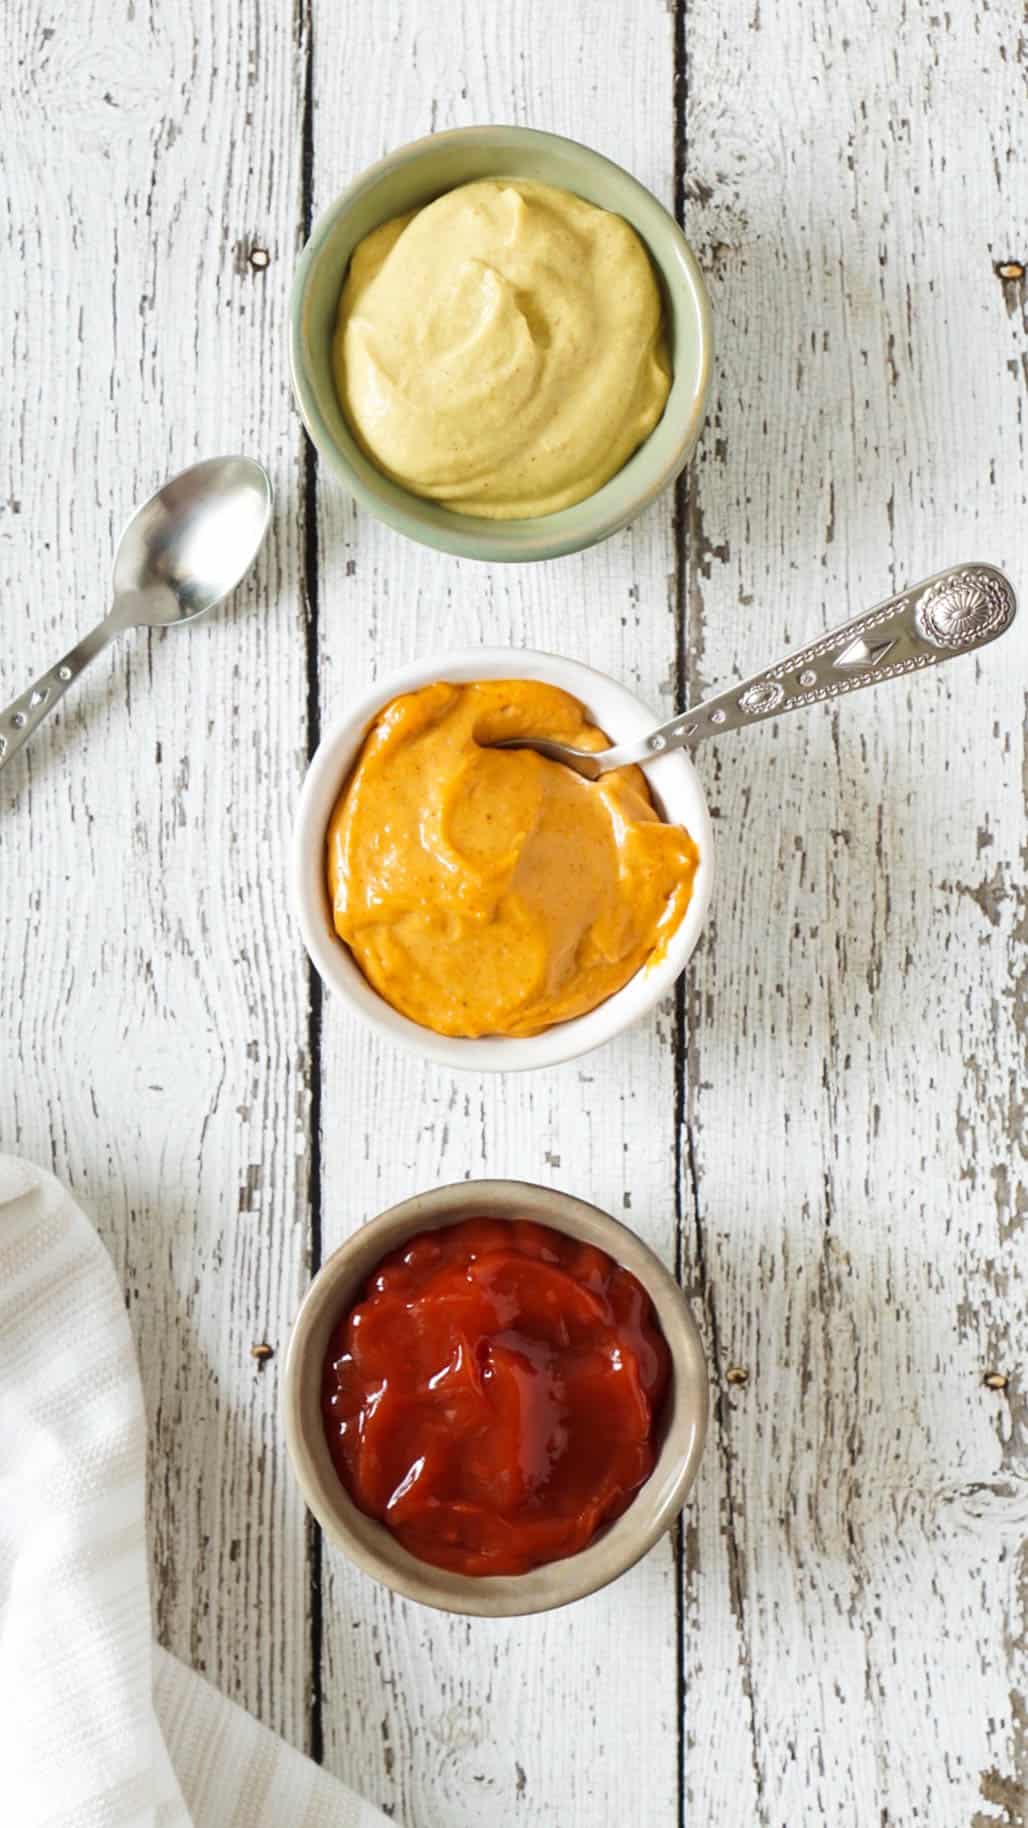 ketchup and mustard in 3 small bowls with silver spoons